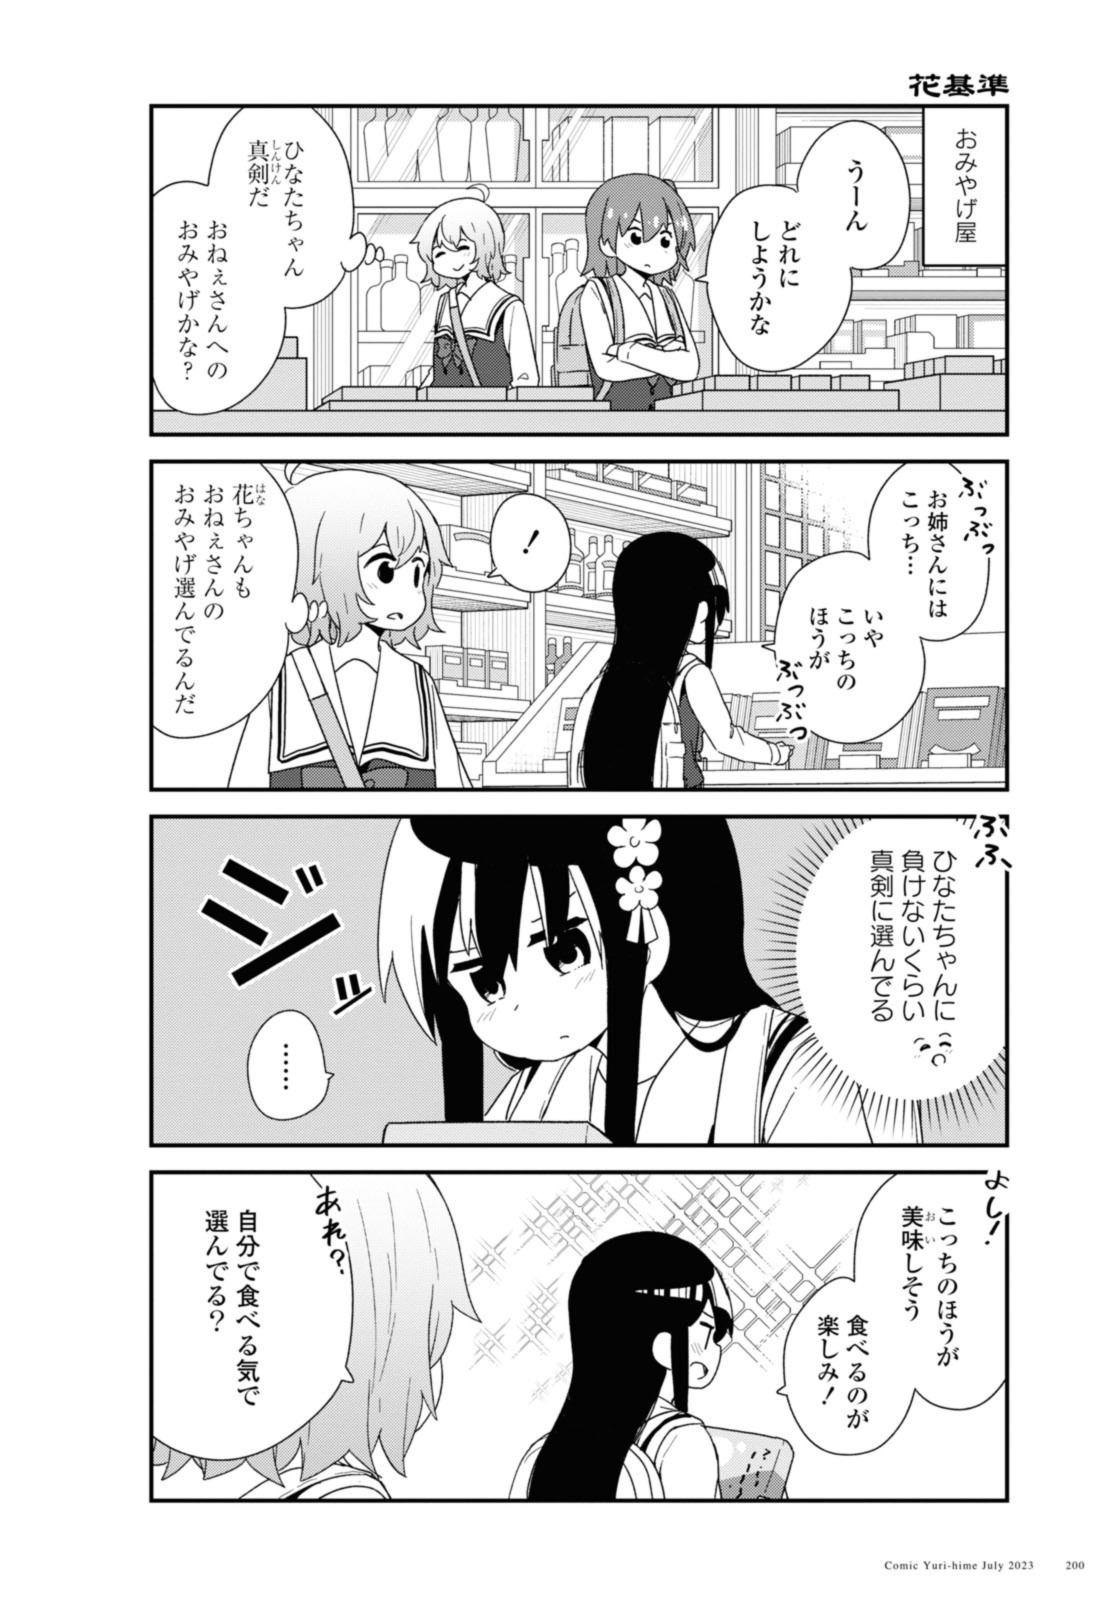 Wataten! An Angel Flew Down to Me 私に天使が舞い降りた！ 第107話 - Page 8